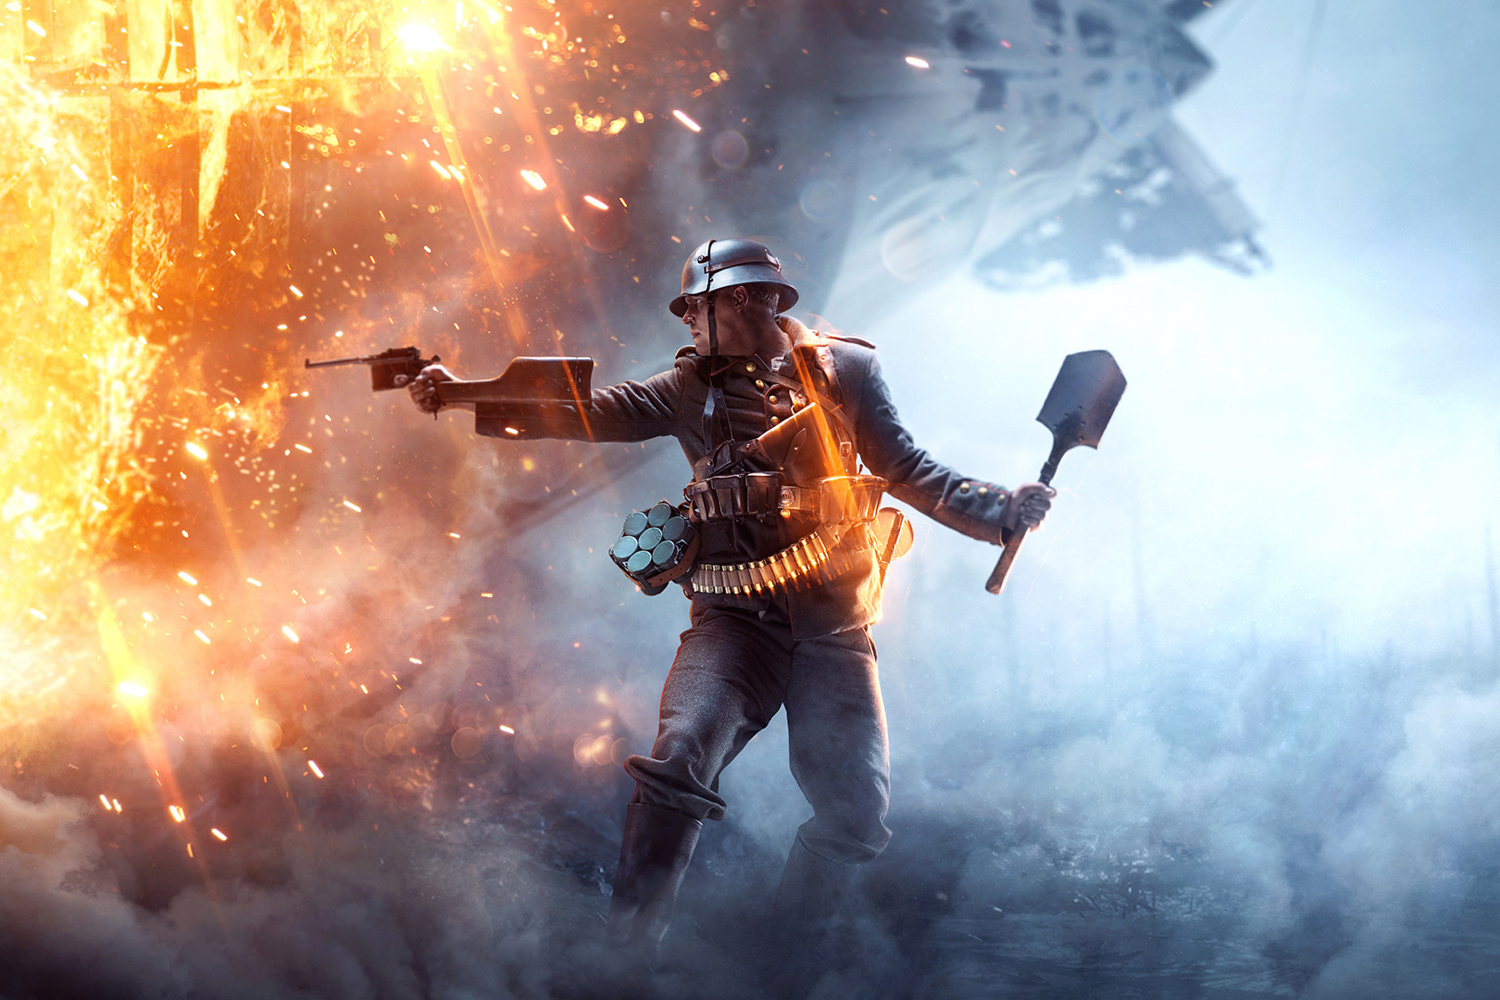 Battlefield r demonstrates Battlefield 5's player visibility problem  in a spectacular way